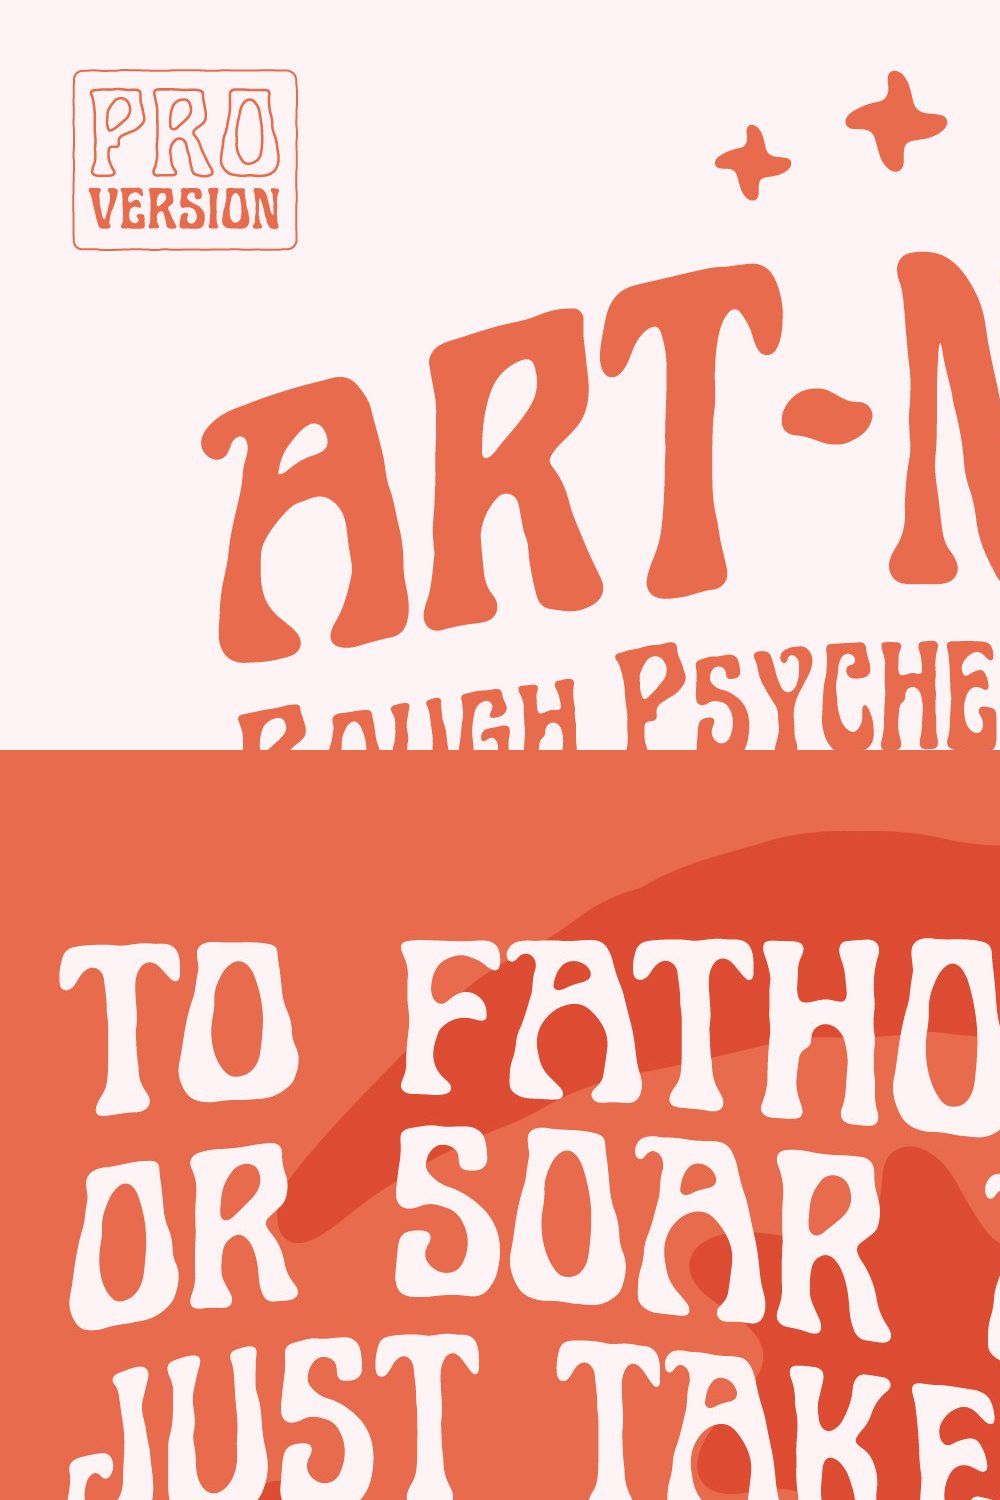 Art-Nuvo - Rough Psychedelic Font pinterest preview image.